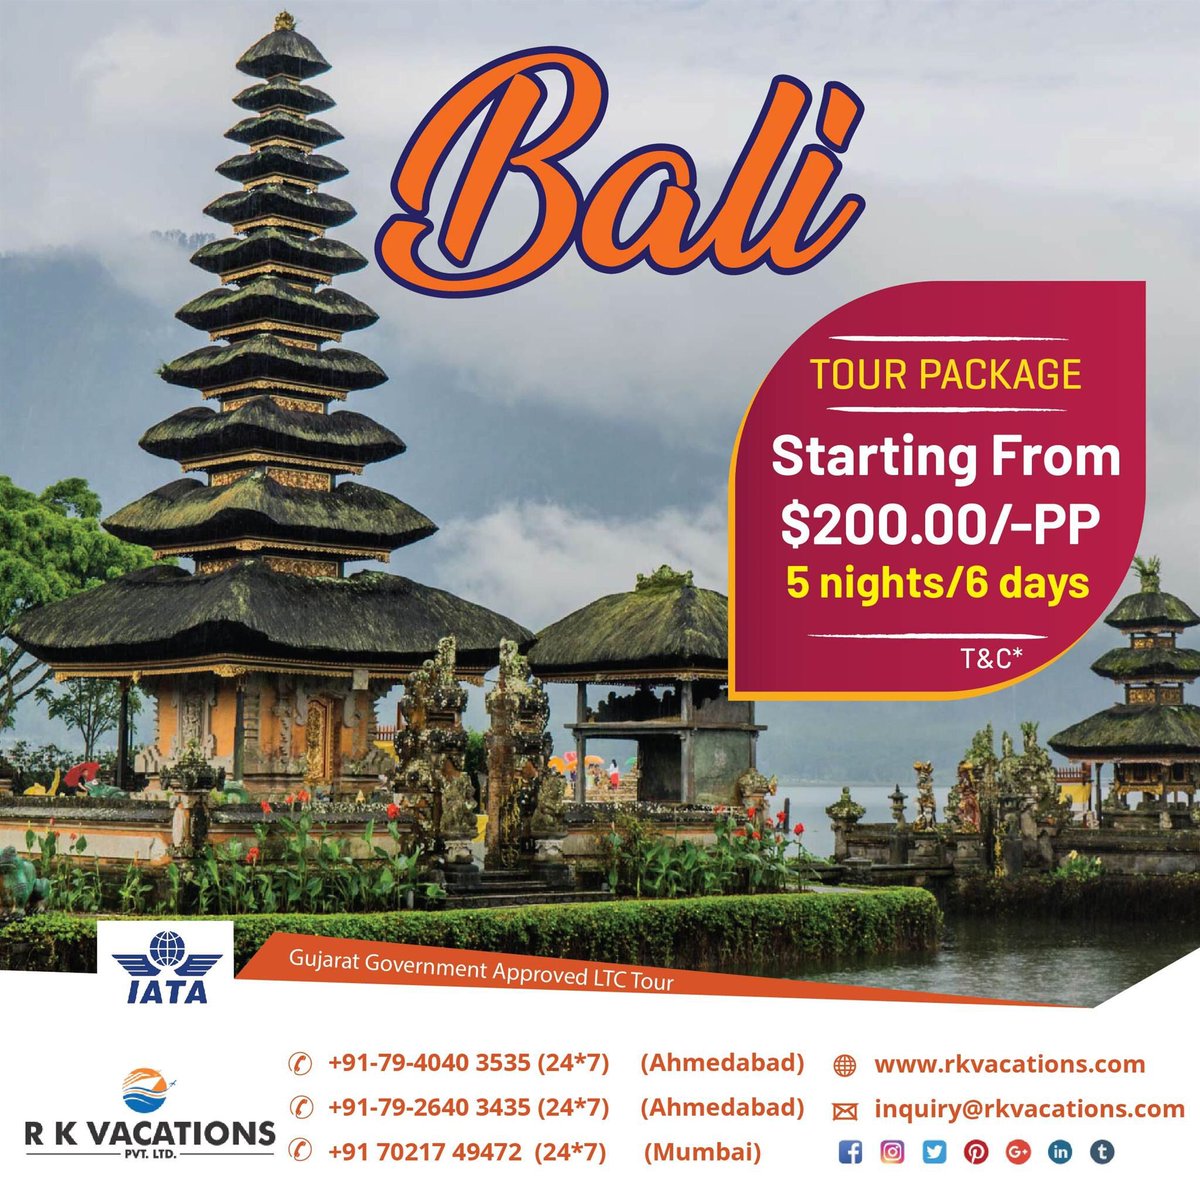 #Bali is a culturally rich #island. It has numerous #temples that show its #Hindu identity. There are too many great #views and #sights to #visit. 
Explore Bali with #rkvacations and #collectmemories!

#BaliTourPackage #ExploreBali #DiwaliTourPackages #DiwaliVacation #BaliHoliday